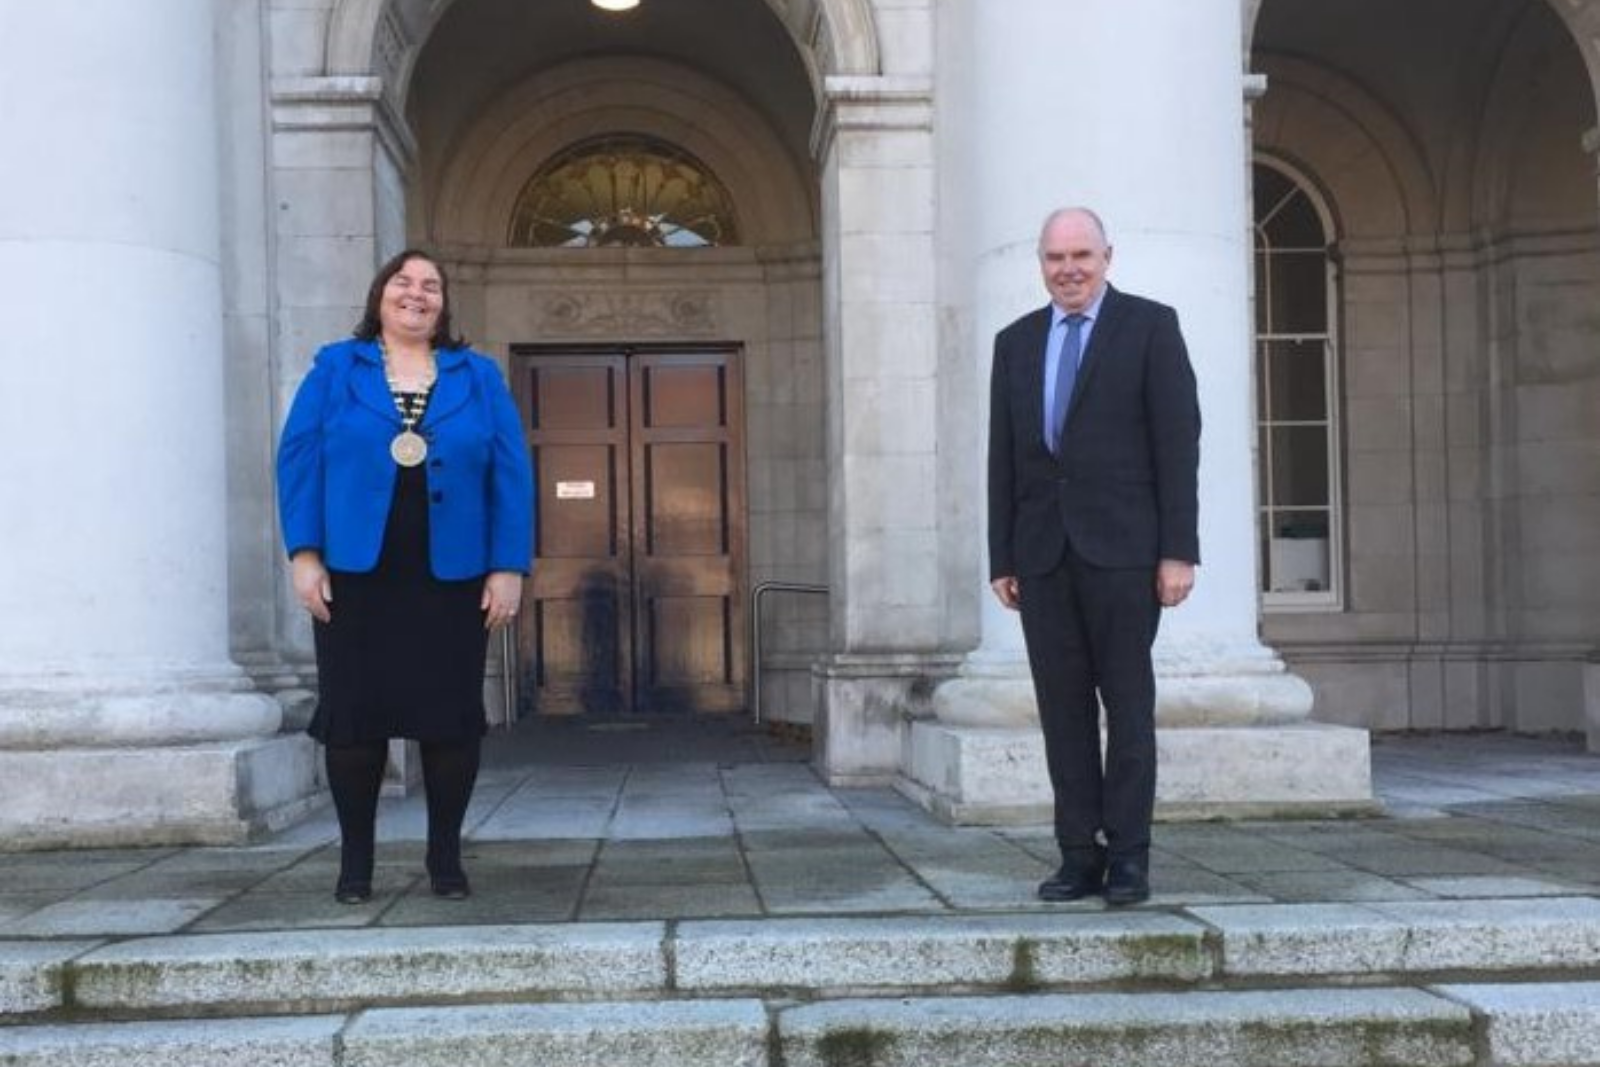 25th November 2020,  Custom House, DublinAILG President Cllr. Mary Hoade and Vice President Cllr. John Joe Fennelly  before their meeting with Minister Peter Burke TD to discuss local government issues and to seek an update on the Moorhead Report.